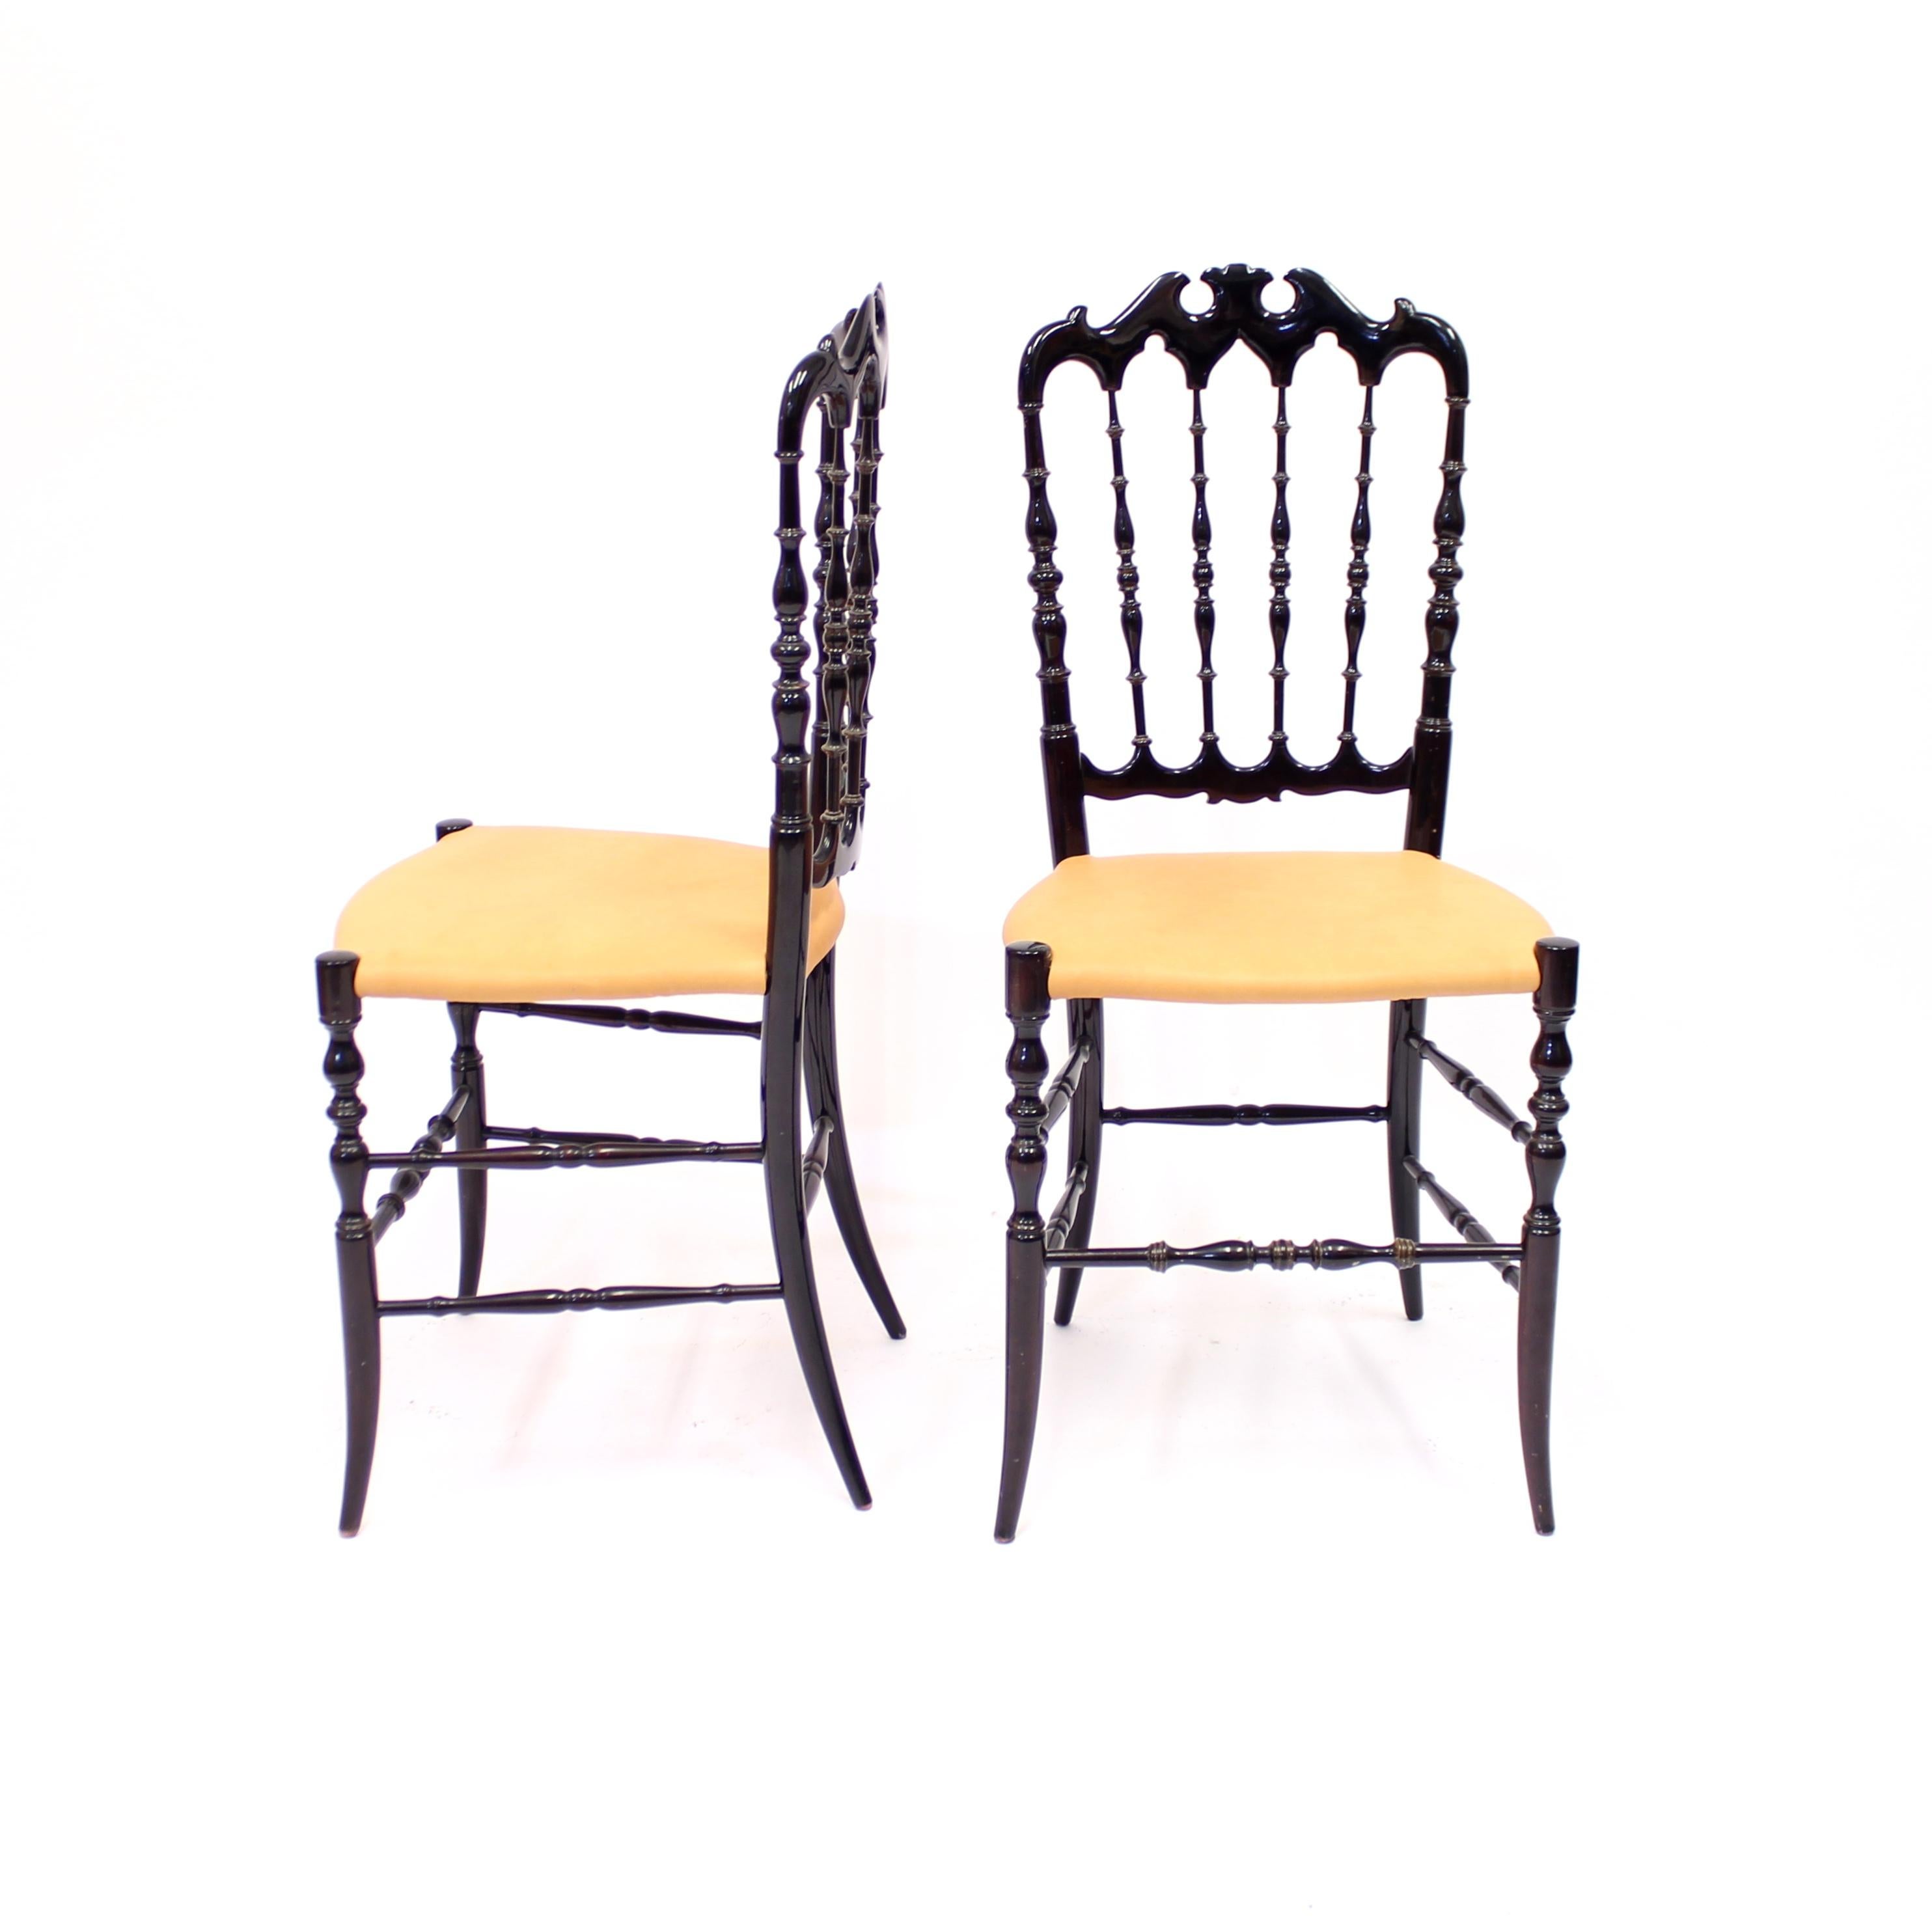 Pair of Vintage Chiavari Chairs with Leather Seats, circa 1950 3